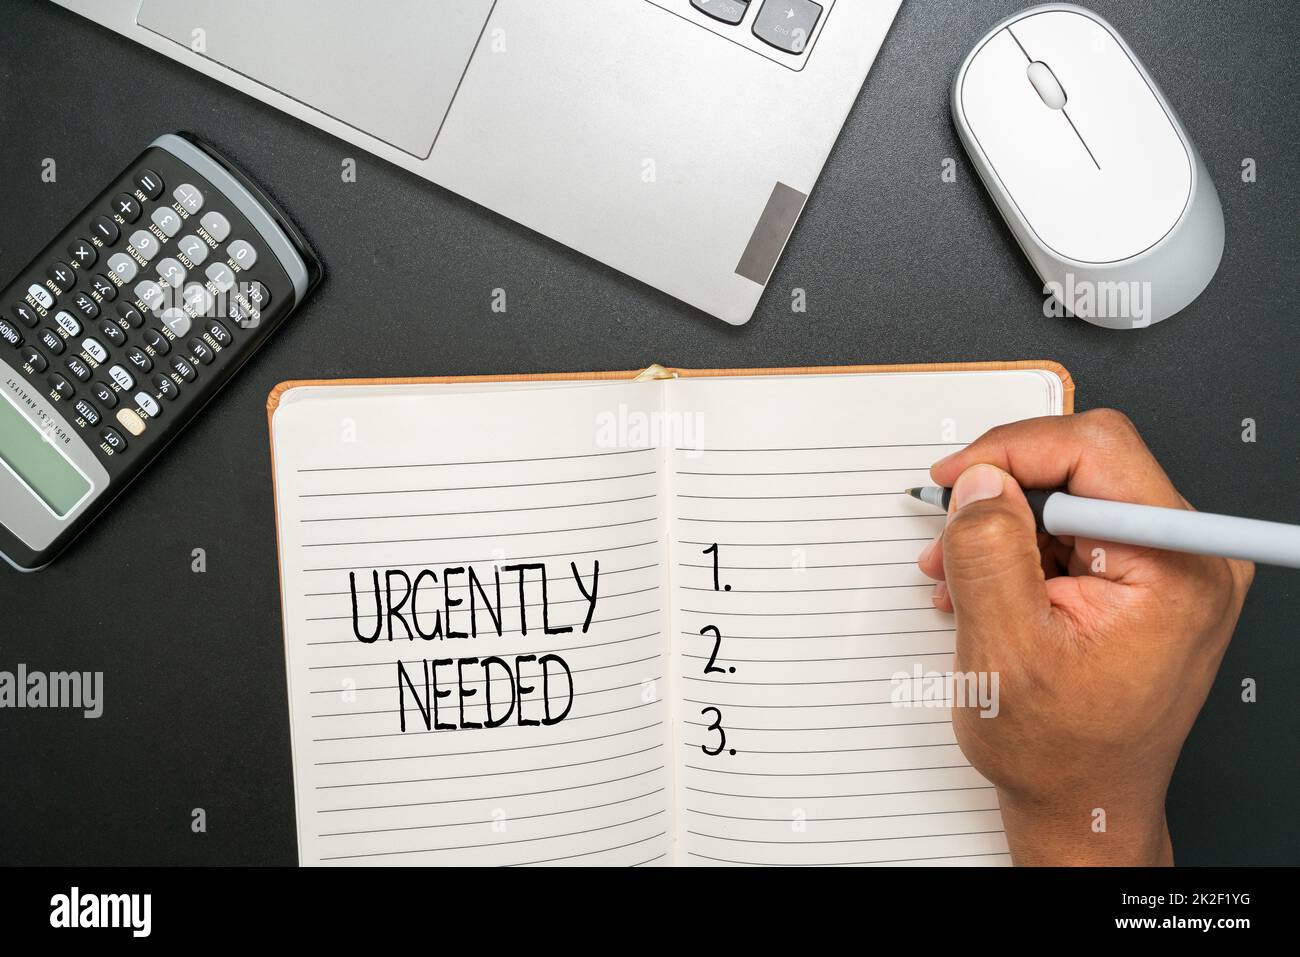 Hand writing sign Urgently Needed. Business concept Urgently Needed Office Supplies Over Desk With Keyboard And Glasses And Coffee Cup For Working Stock Photo